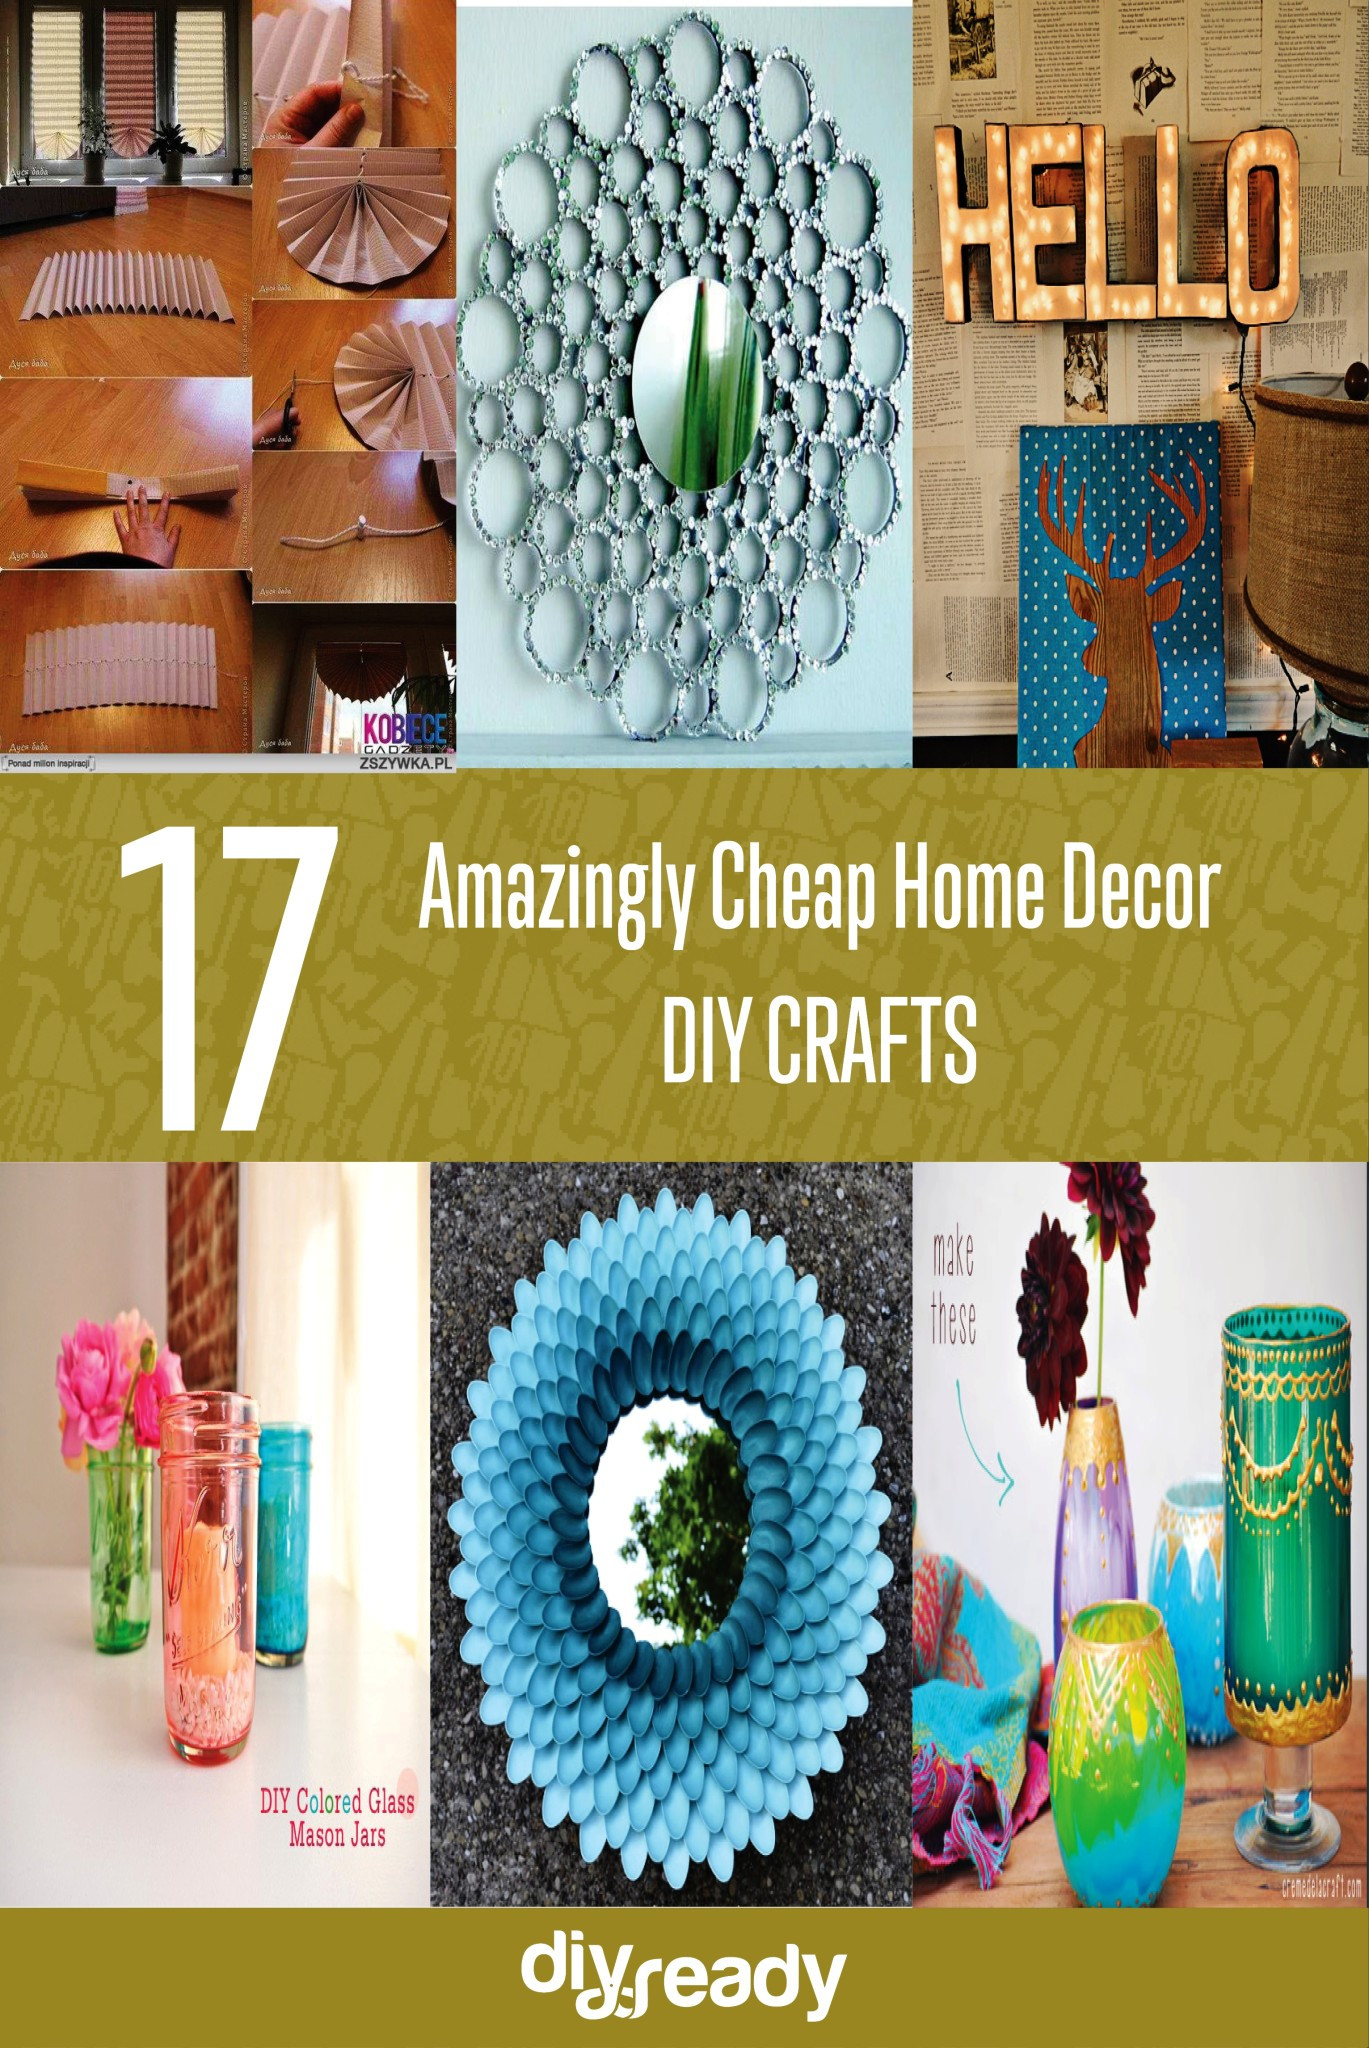 DIY Craft Ideas For Home Decor
 Cheap Home Decor Ideas DIY Projects Craft Ideas & How To’s